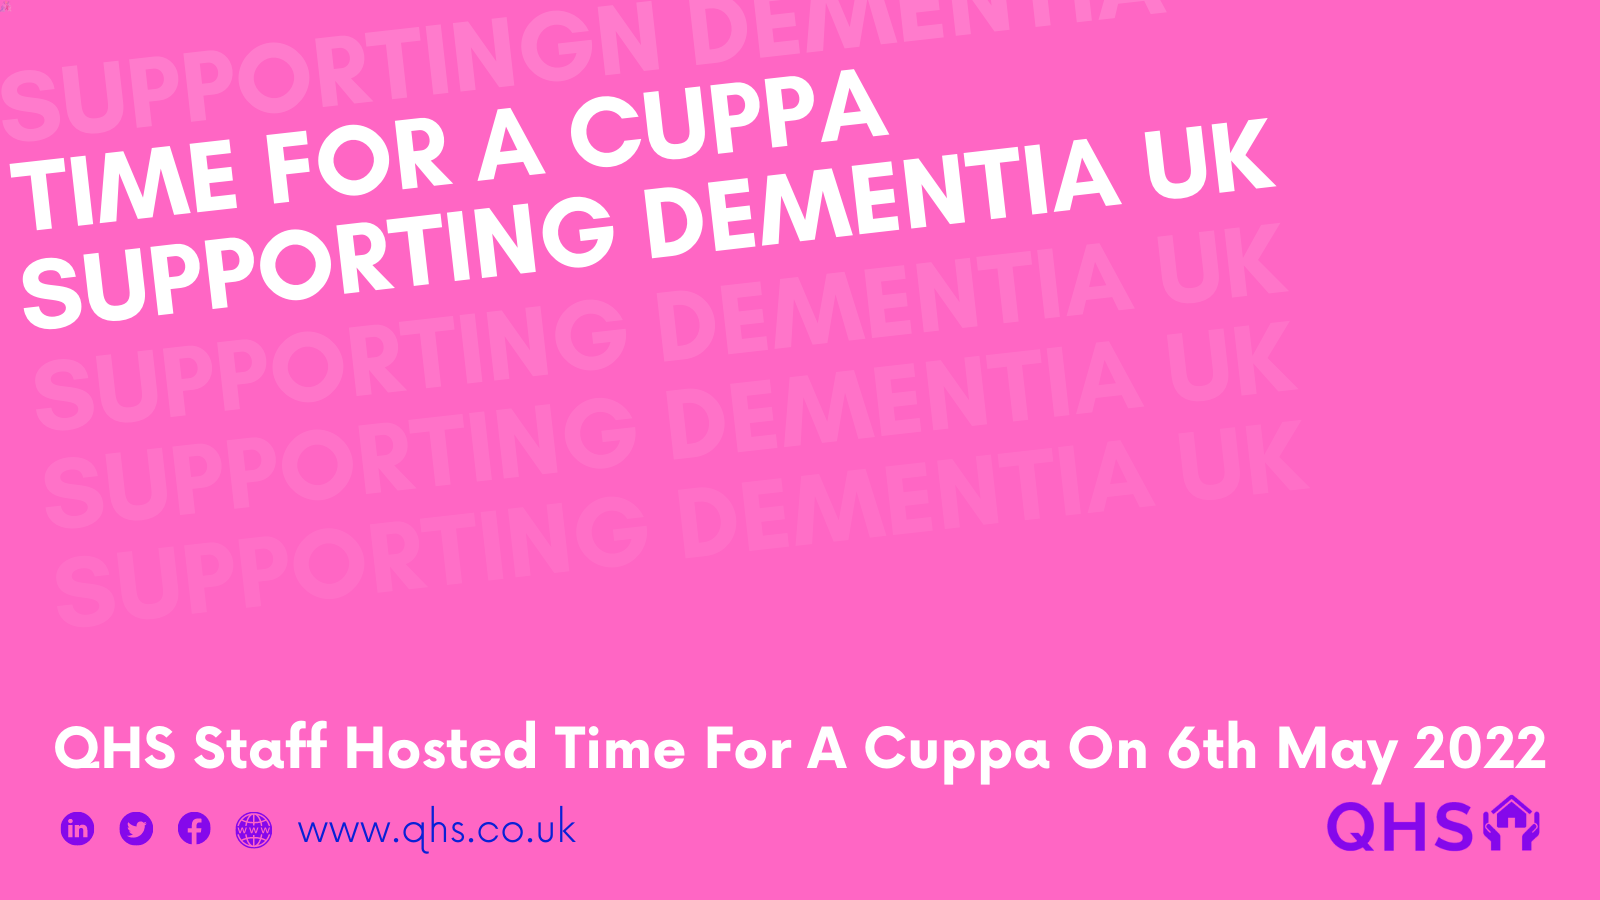 QHS Staff Hold Time For A Cuppa Event Raising Money For Dementia UK